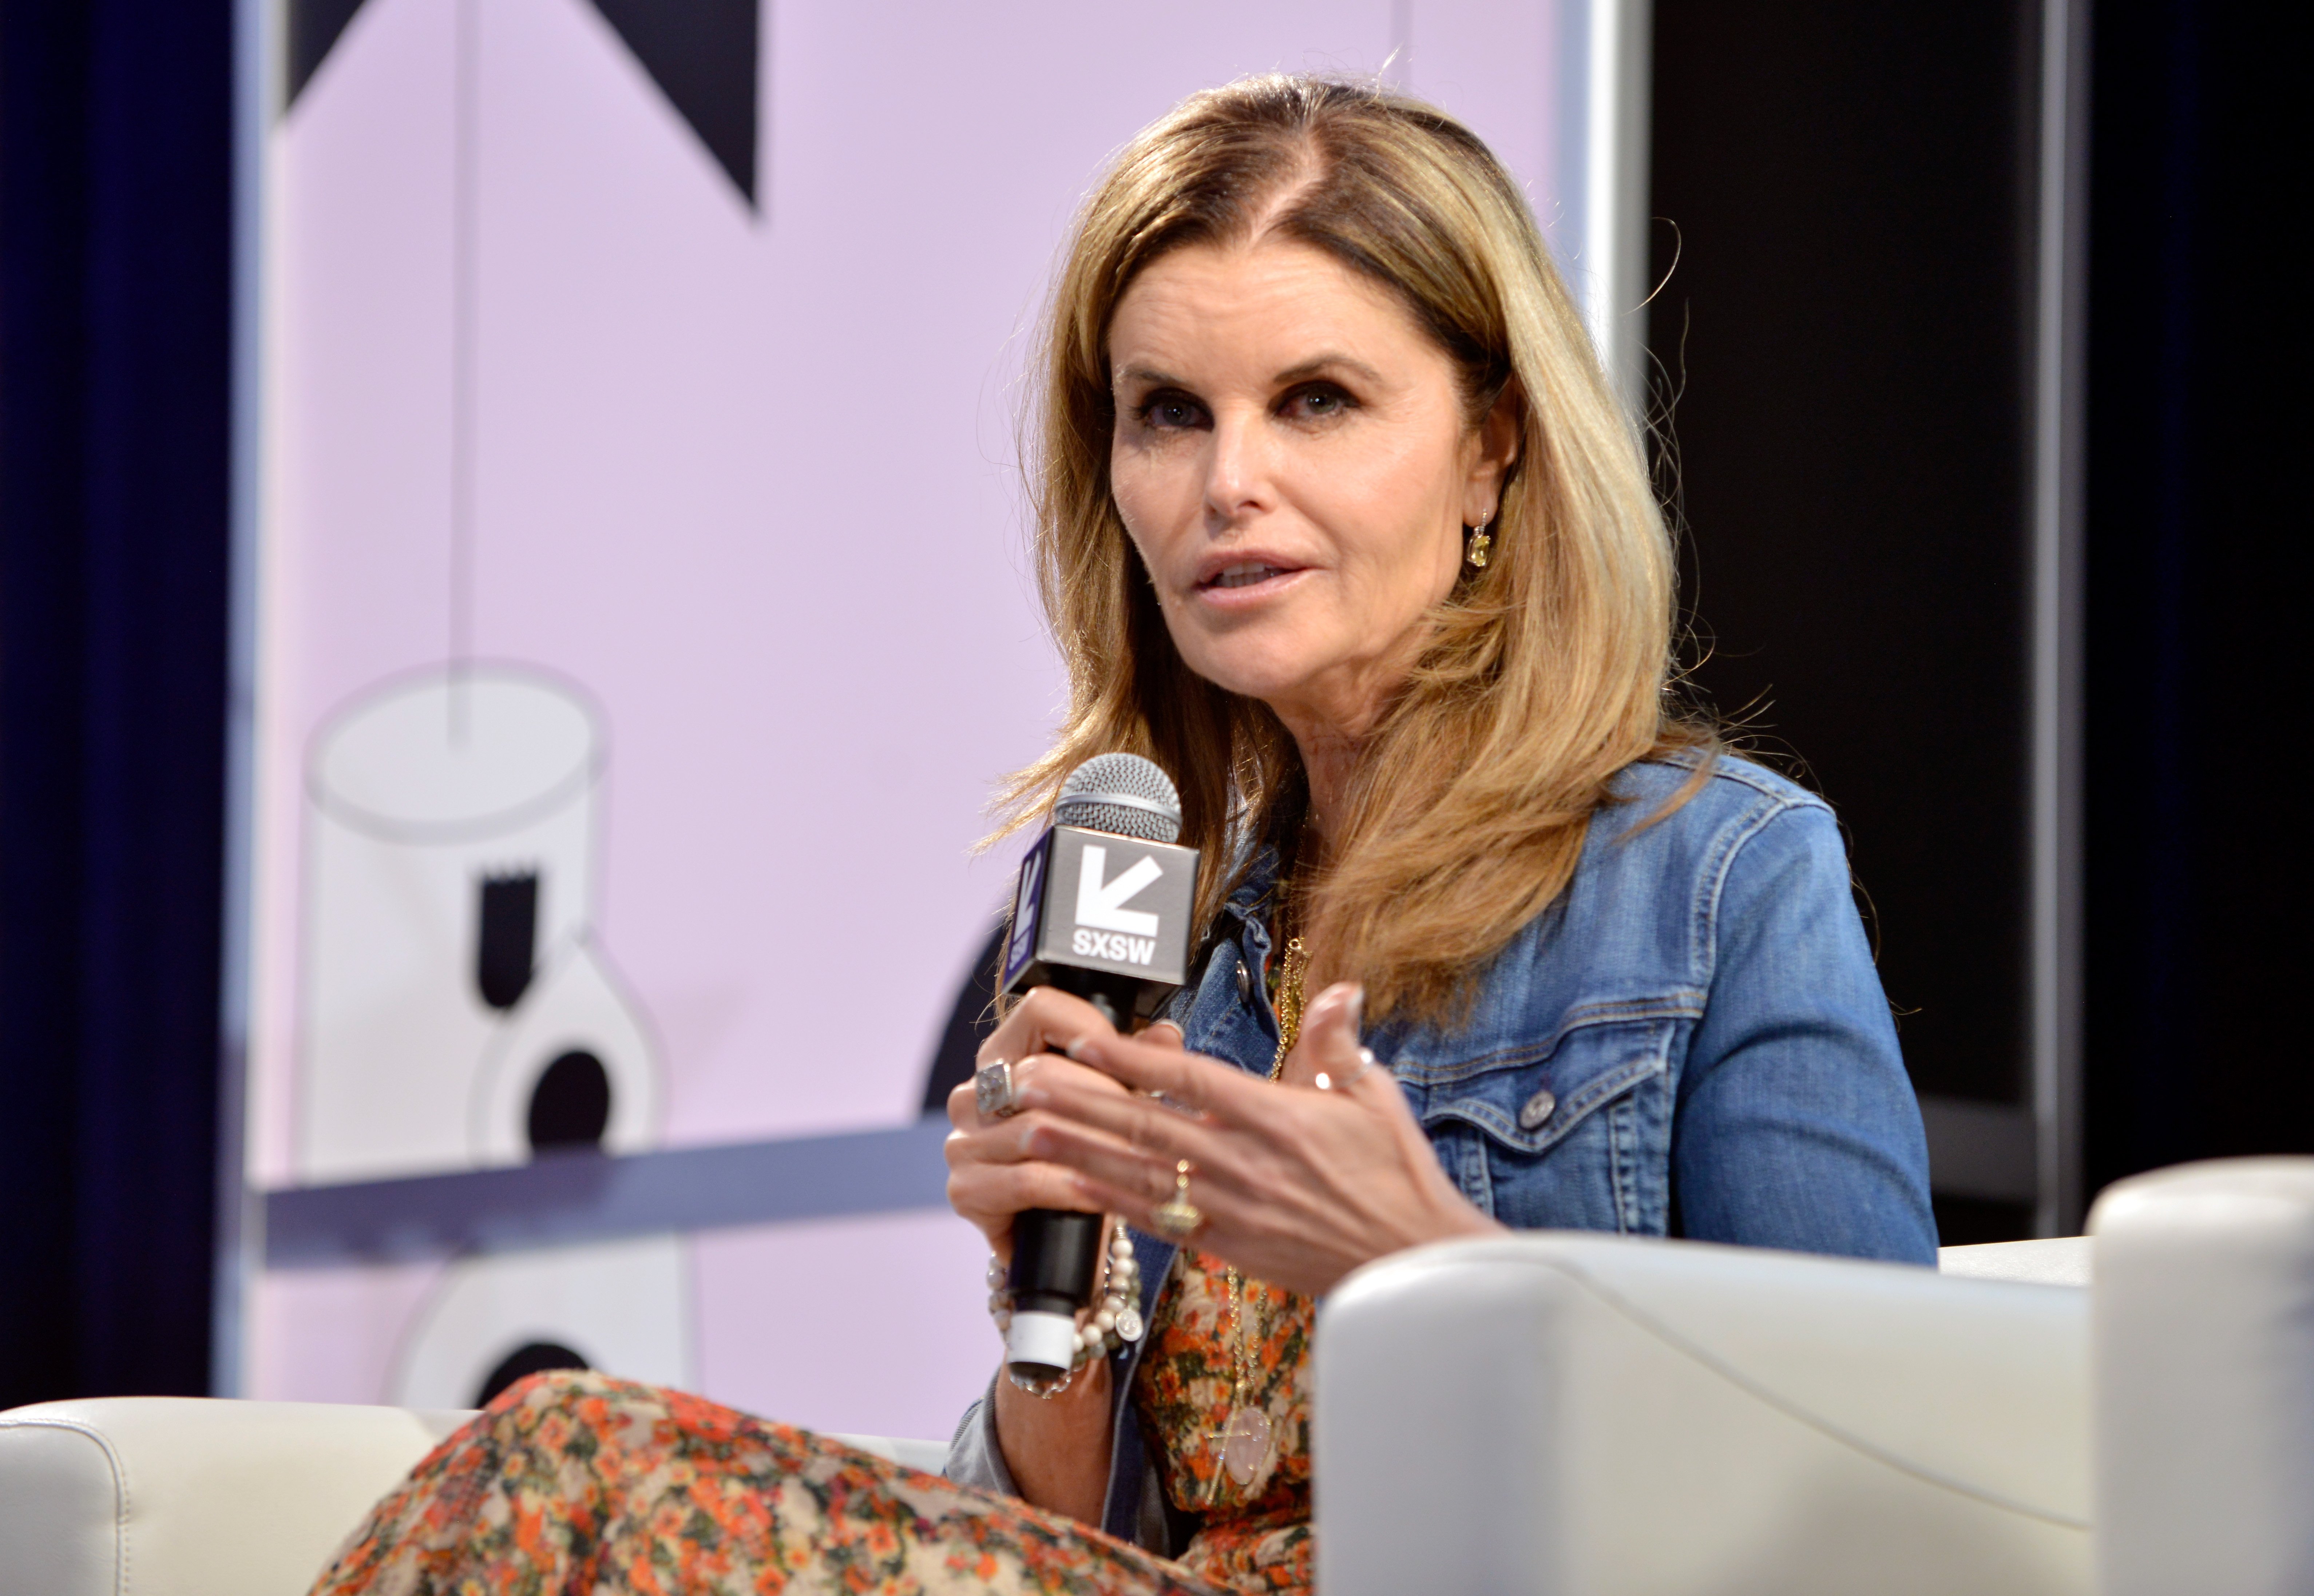 Maria Shriver speaks onstage at Featured Session: Maria Shriver, Alexandra Socha, and Farida Sohrabji with Ashley C. Ford during the 2019 SXSW Conference and Festivals at Austin Convention Center on March 8, 2019, in Austin, Texas. | Source: Getty Images